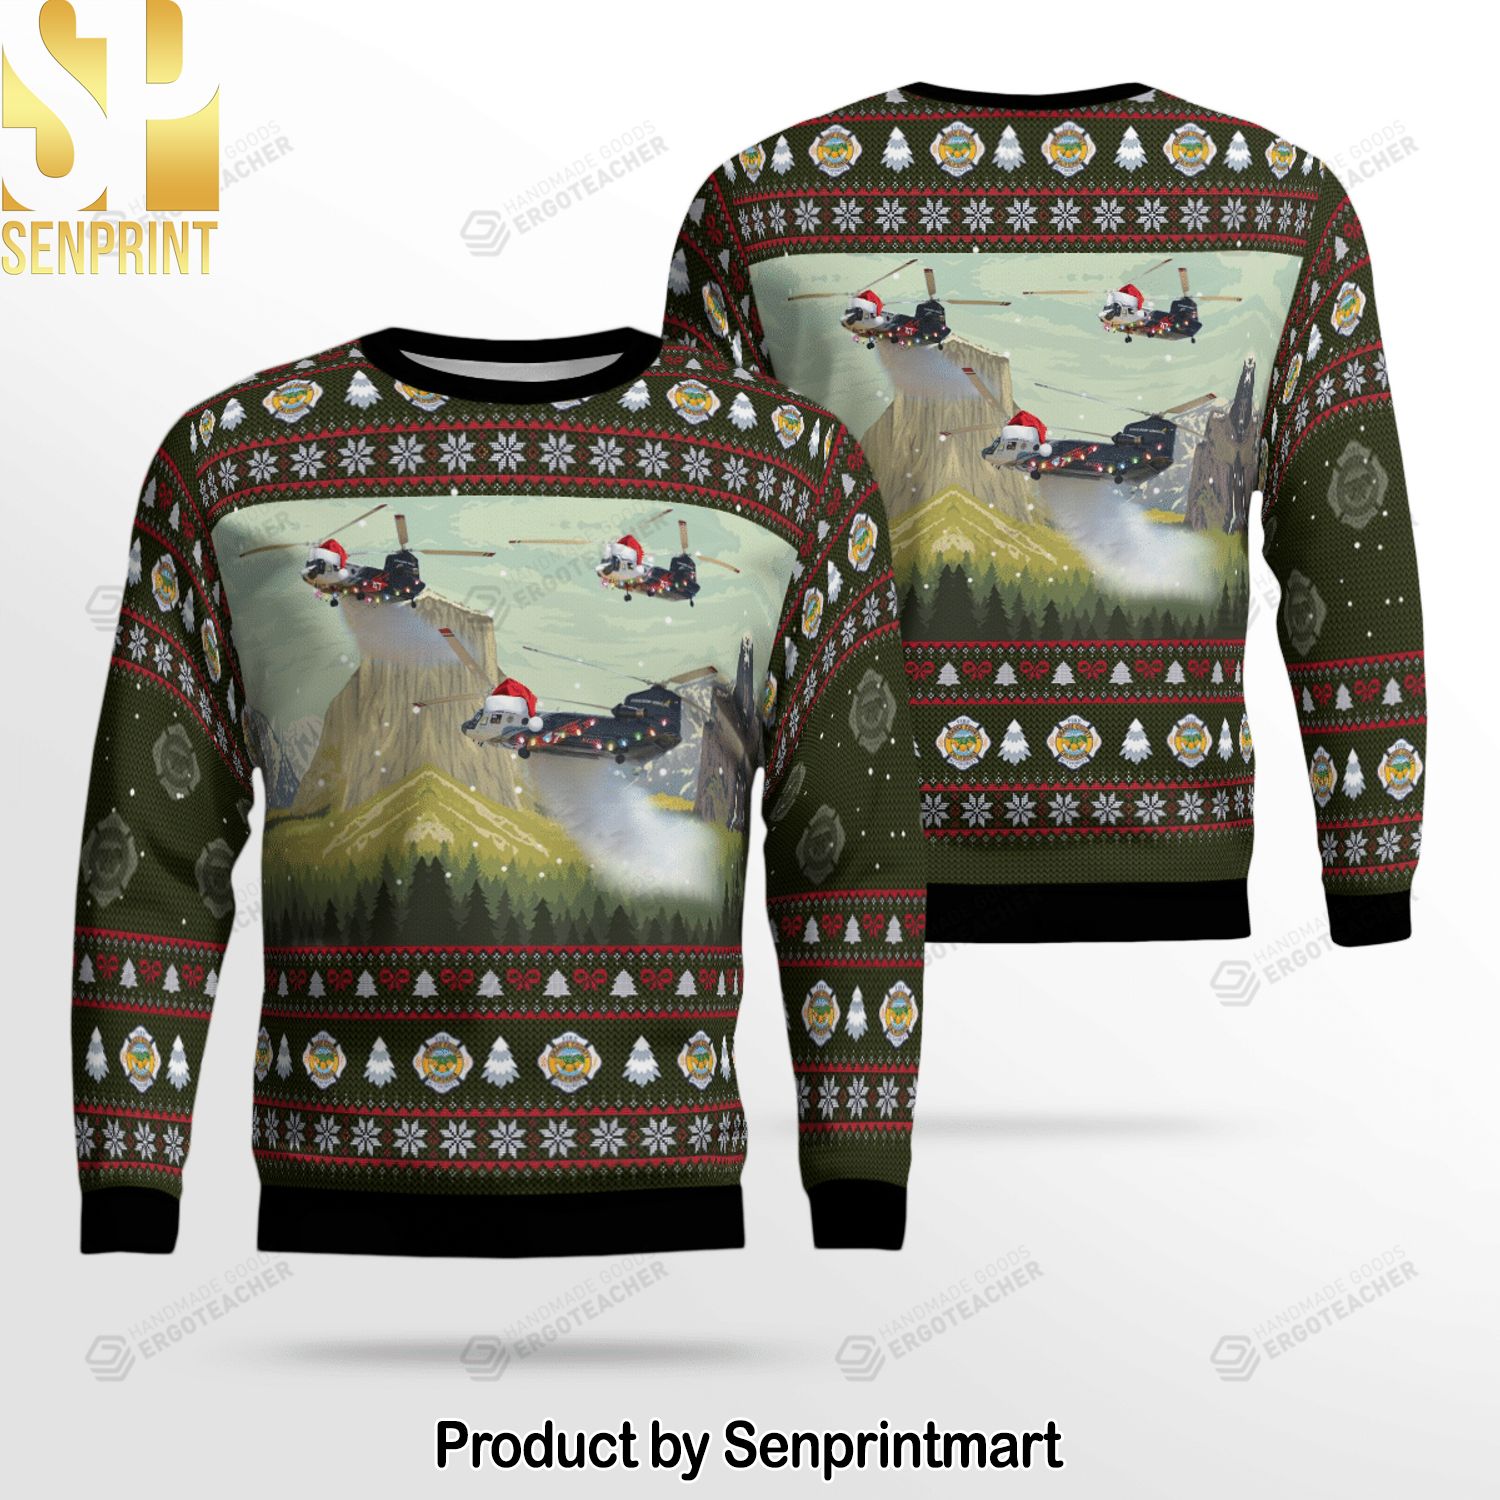 Orange County Fire Authority Boeing Ch-47d Chinook Helicopter Knitting Pattern 3D Print Ugly Sweater